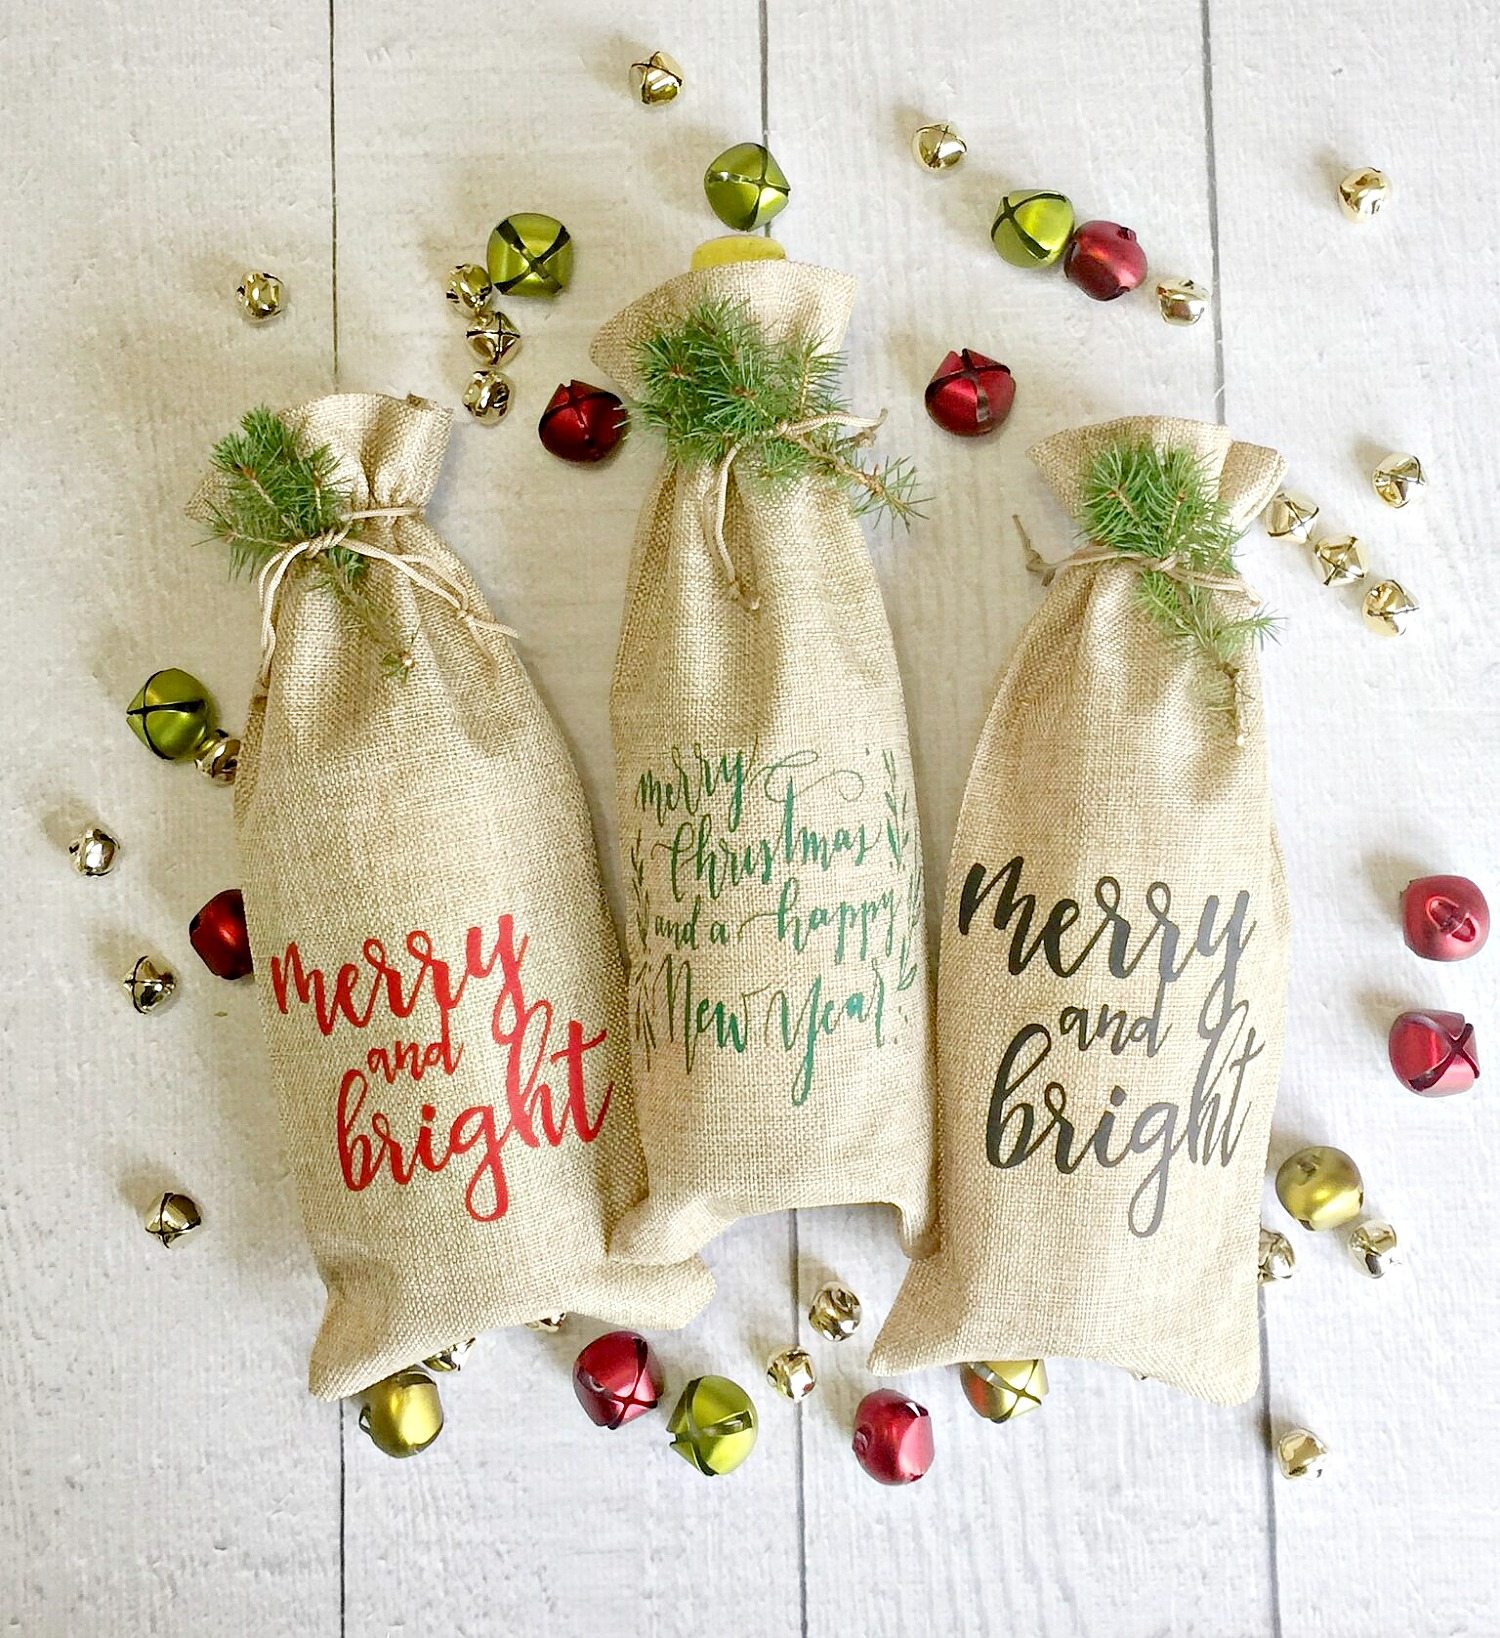 Wine bags make great Christmas gifts